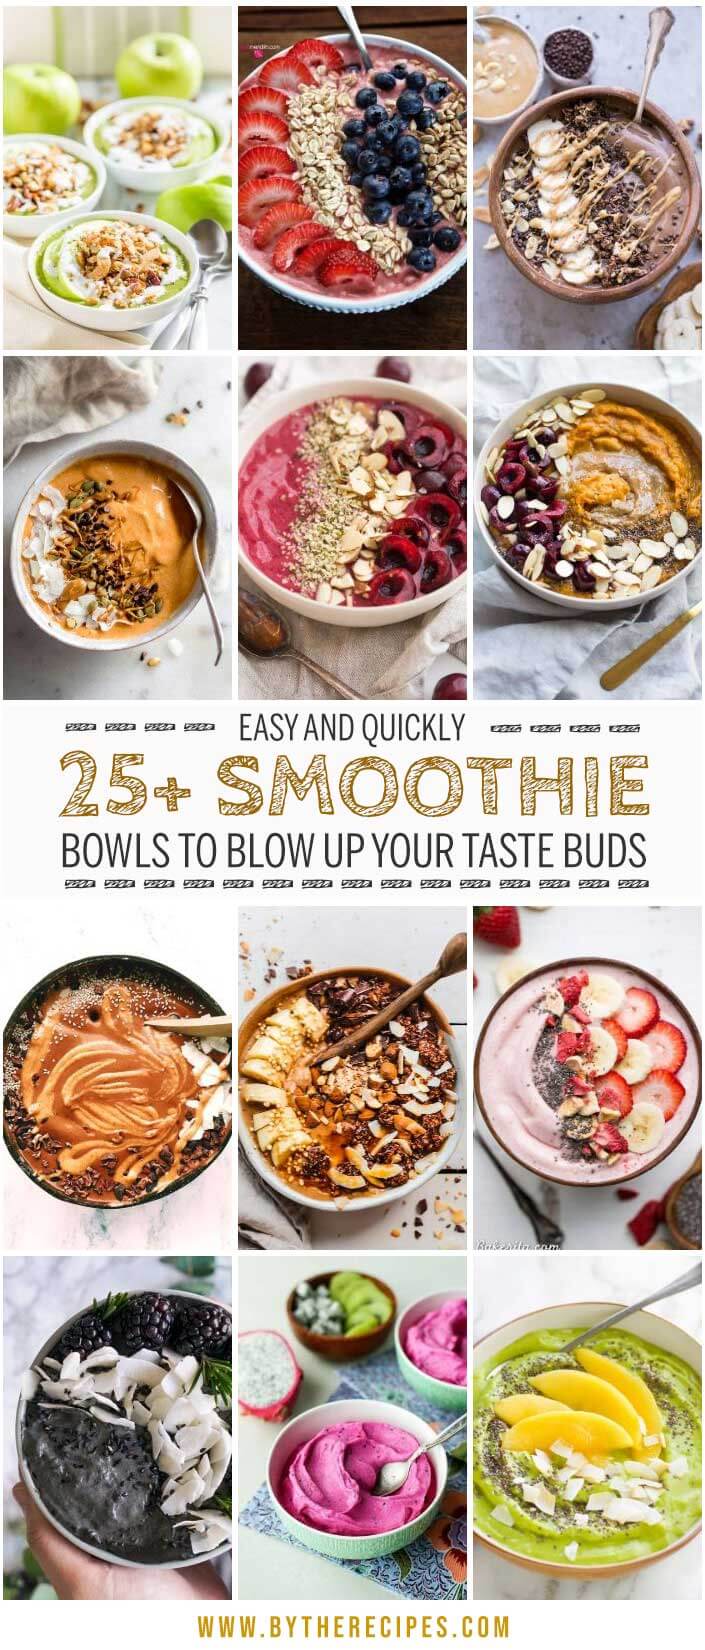 25 Smoothie Bowls To Blow Up Your Taste Buds